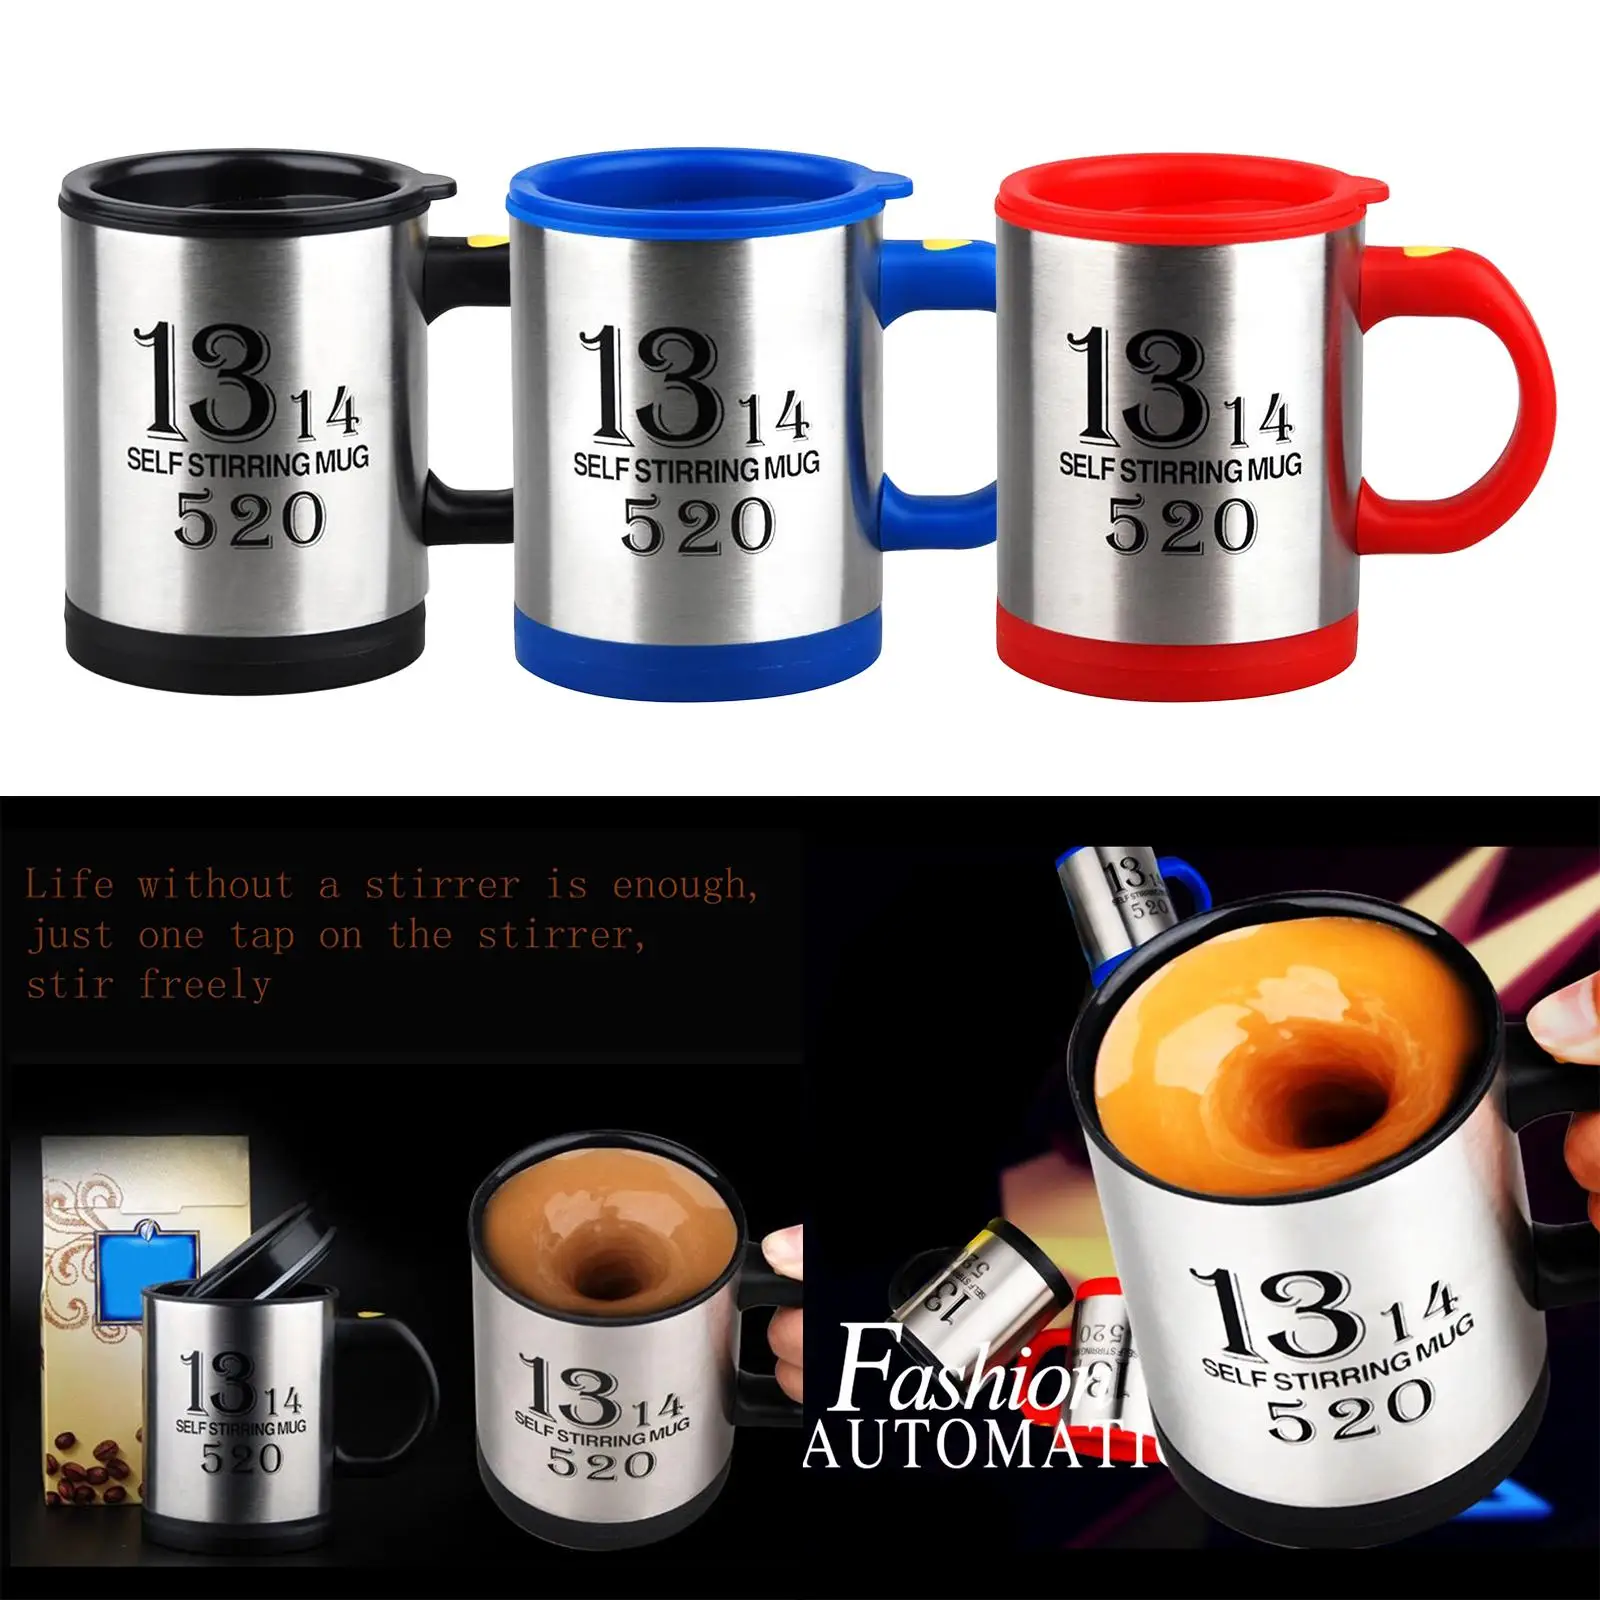 Self Stirring e Mug Stainless Steel Automatic Mixing e Cup with Lid for Home, Office, Travel 400 ml / 13.5